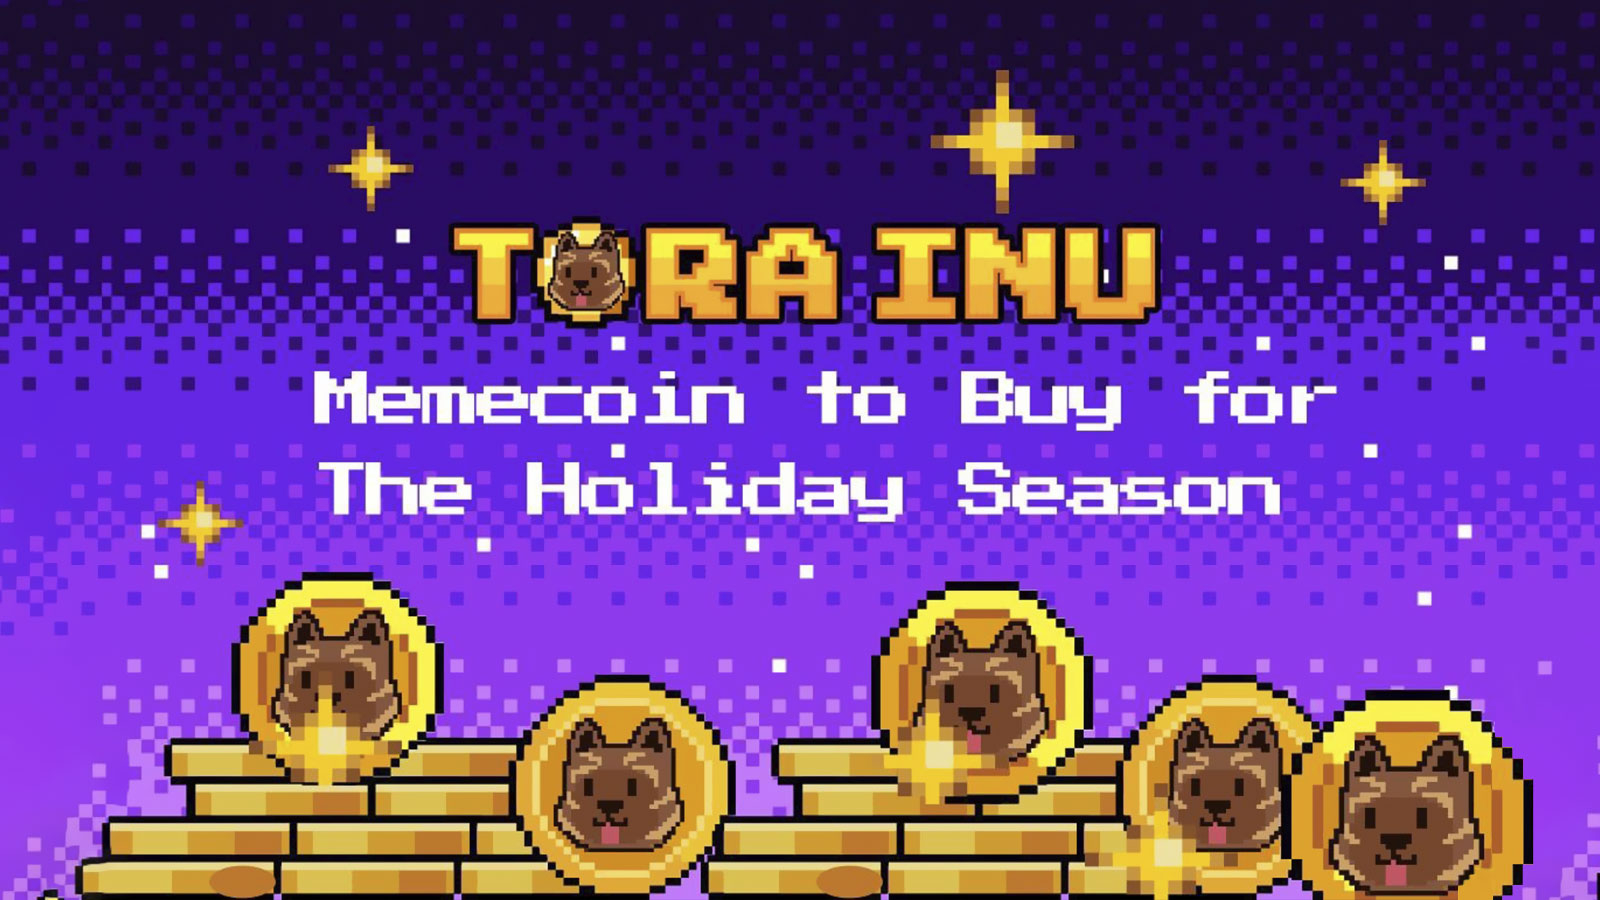 Consider Tora Inu (Tora) Memecoin to Buy for The Holiday Season